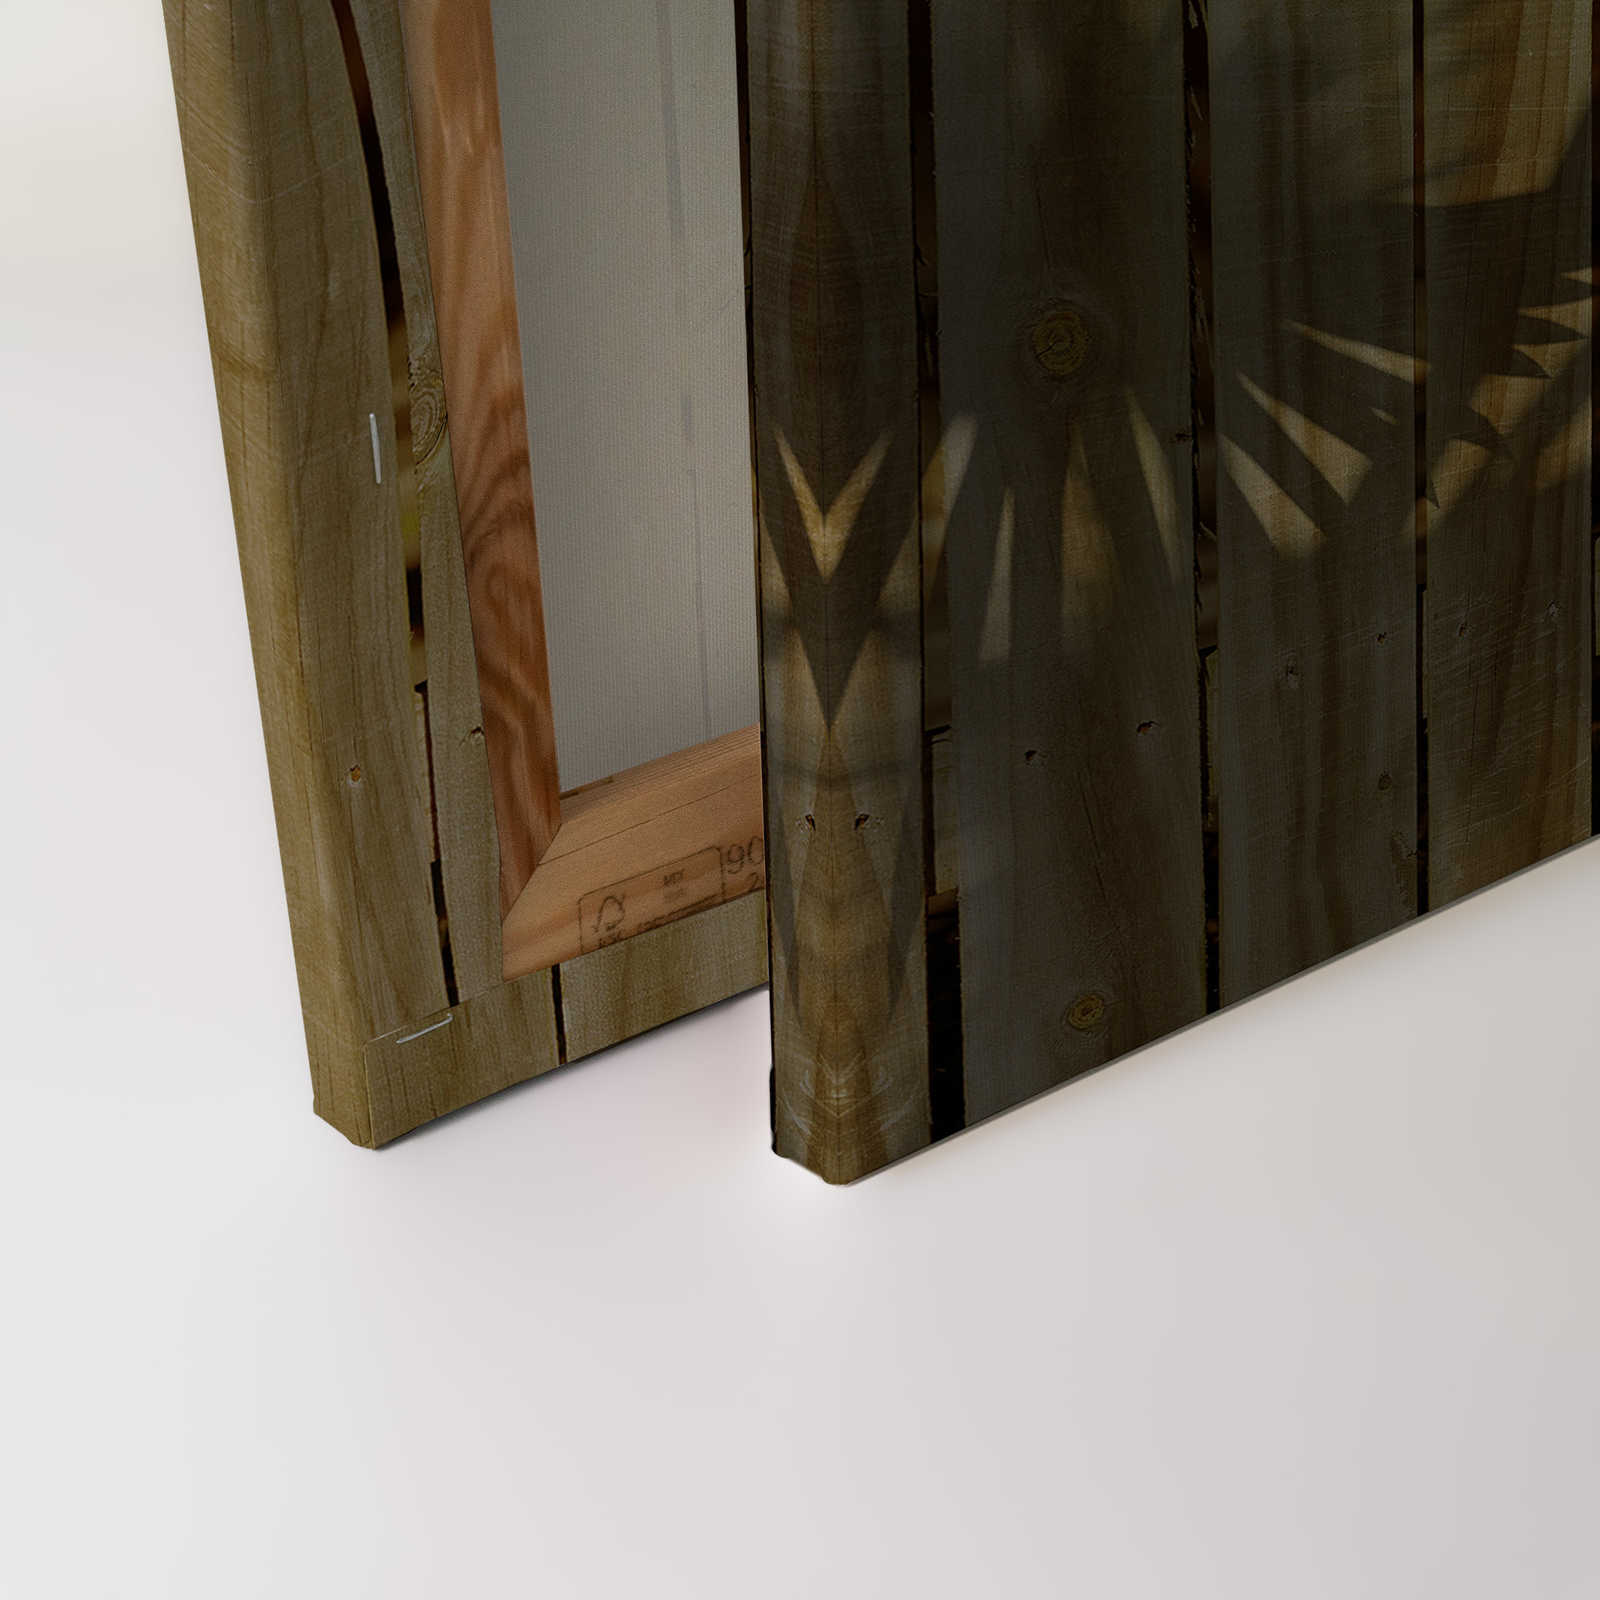             Canvas painting with wood look and palm leaf shade - 0.90 m x 0.60 m
        